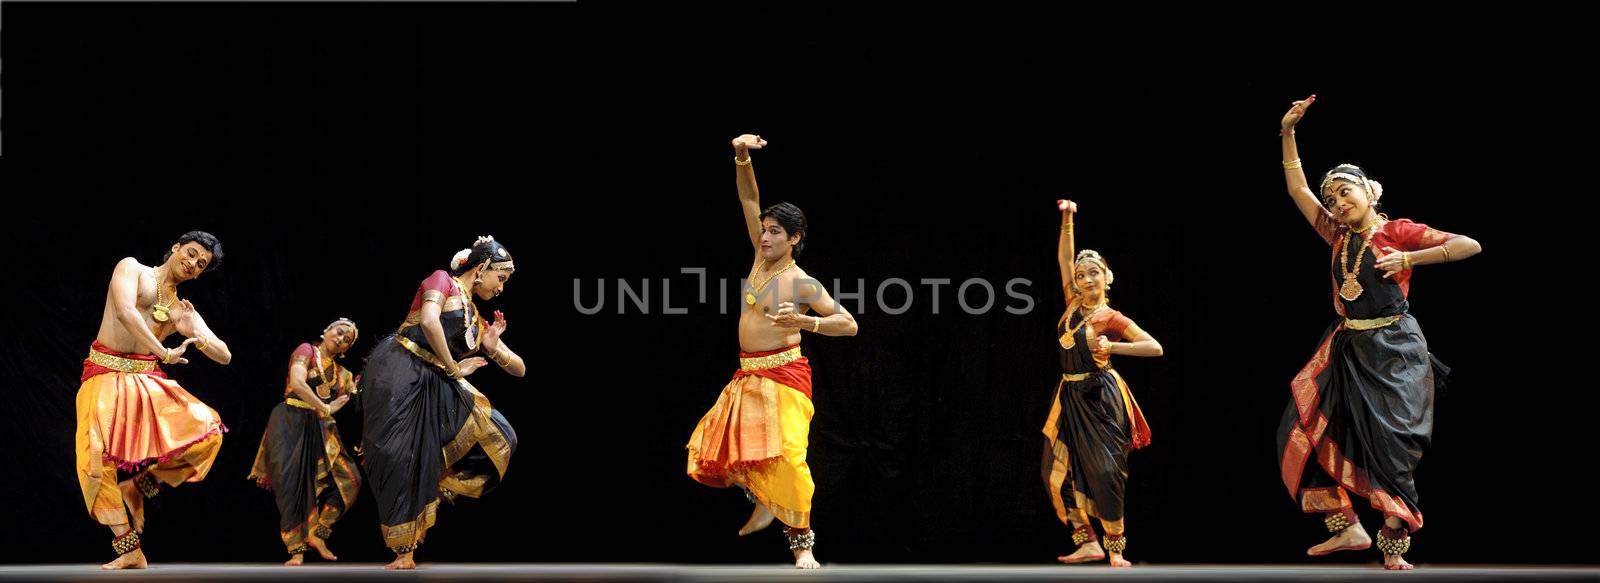 CHENGDU - OCT 24: Indian folk dance "Shankara Sri Giri" performed by Kalakshetra dance institute of India at JINCHENG theater during the festival of India in china.OCT 24,2010 in Chengdu, China.